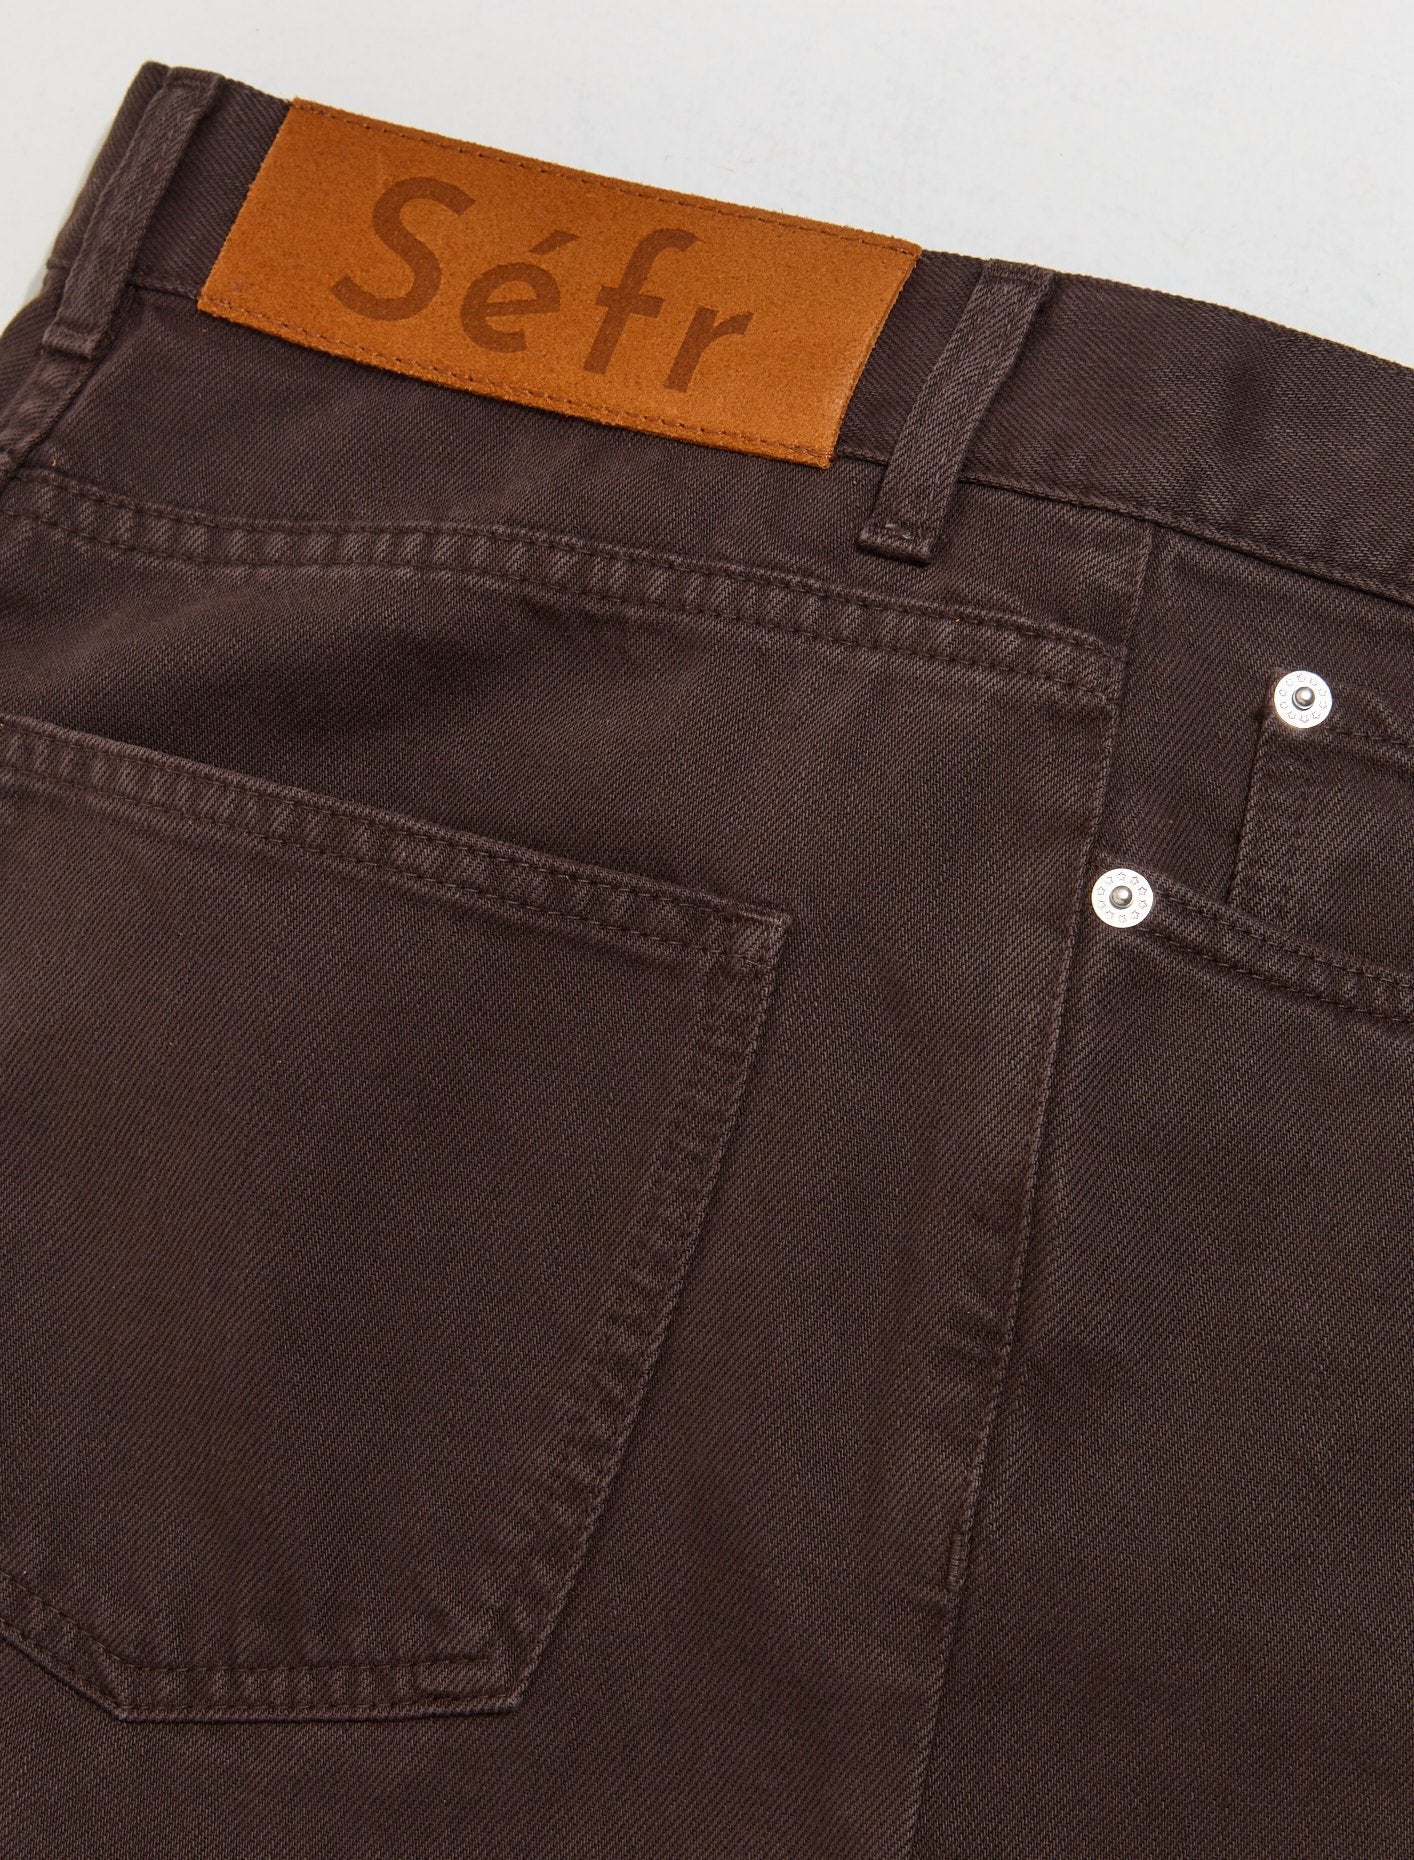 Wide Cut Jeans in Washed Brown